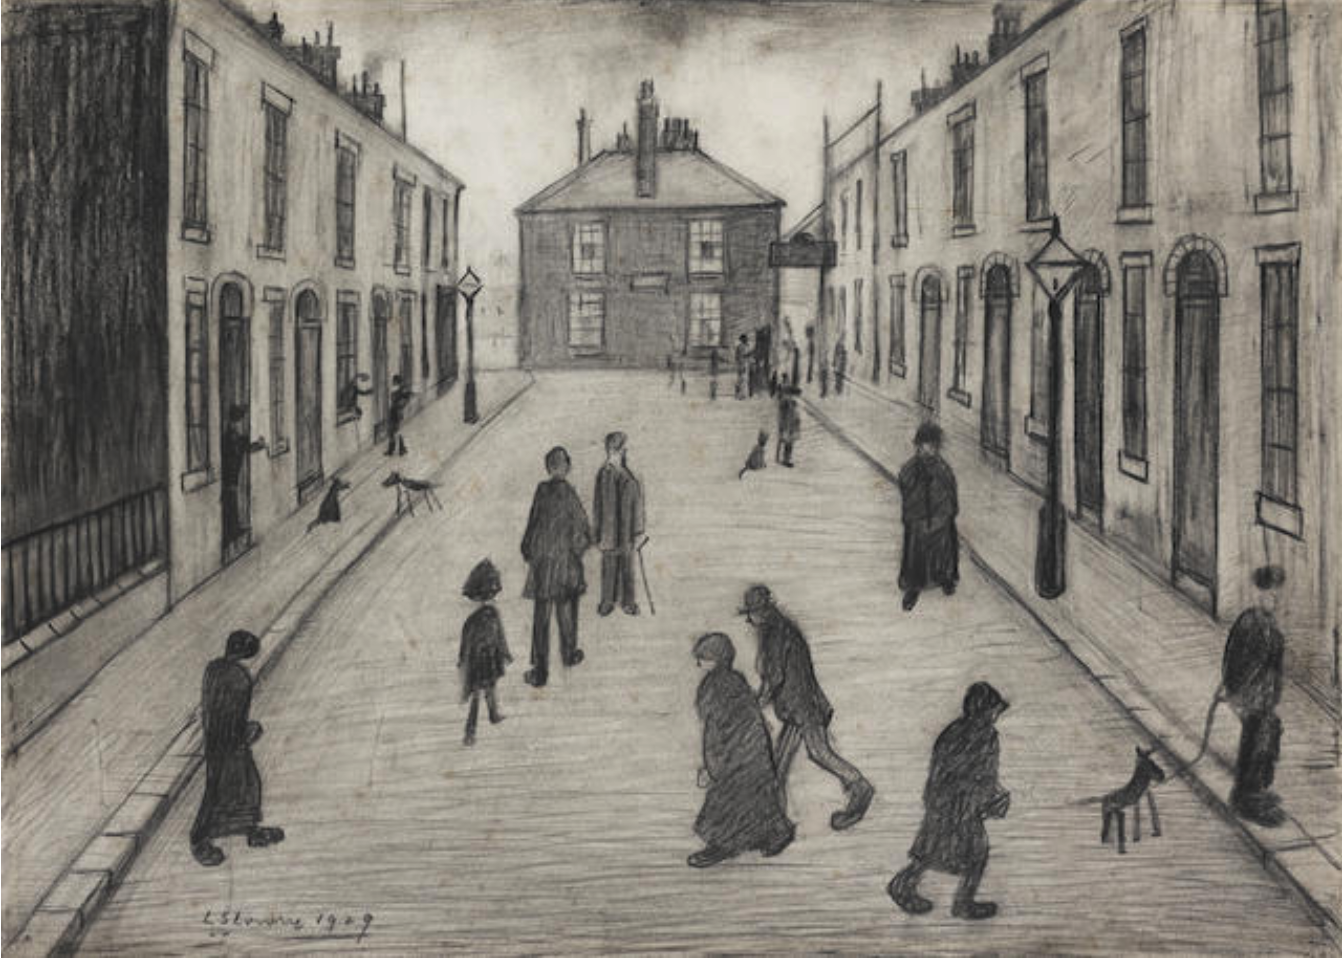 Oldham Road (1929) by Laurence Stephen Lowry (1887 - 1976), English artist.